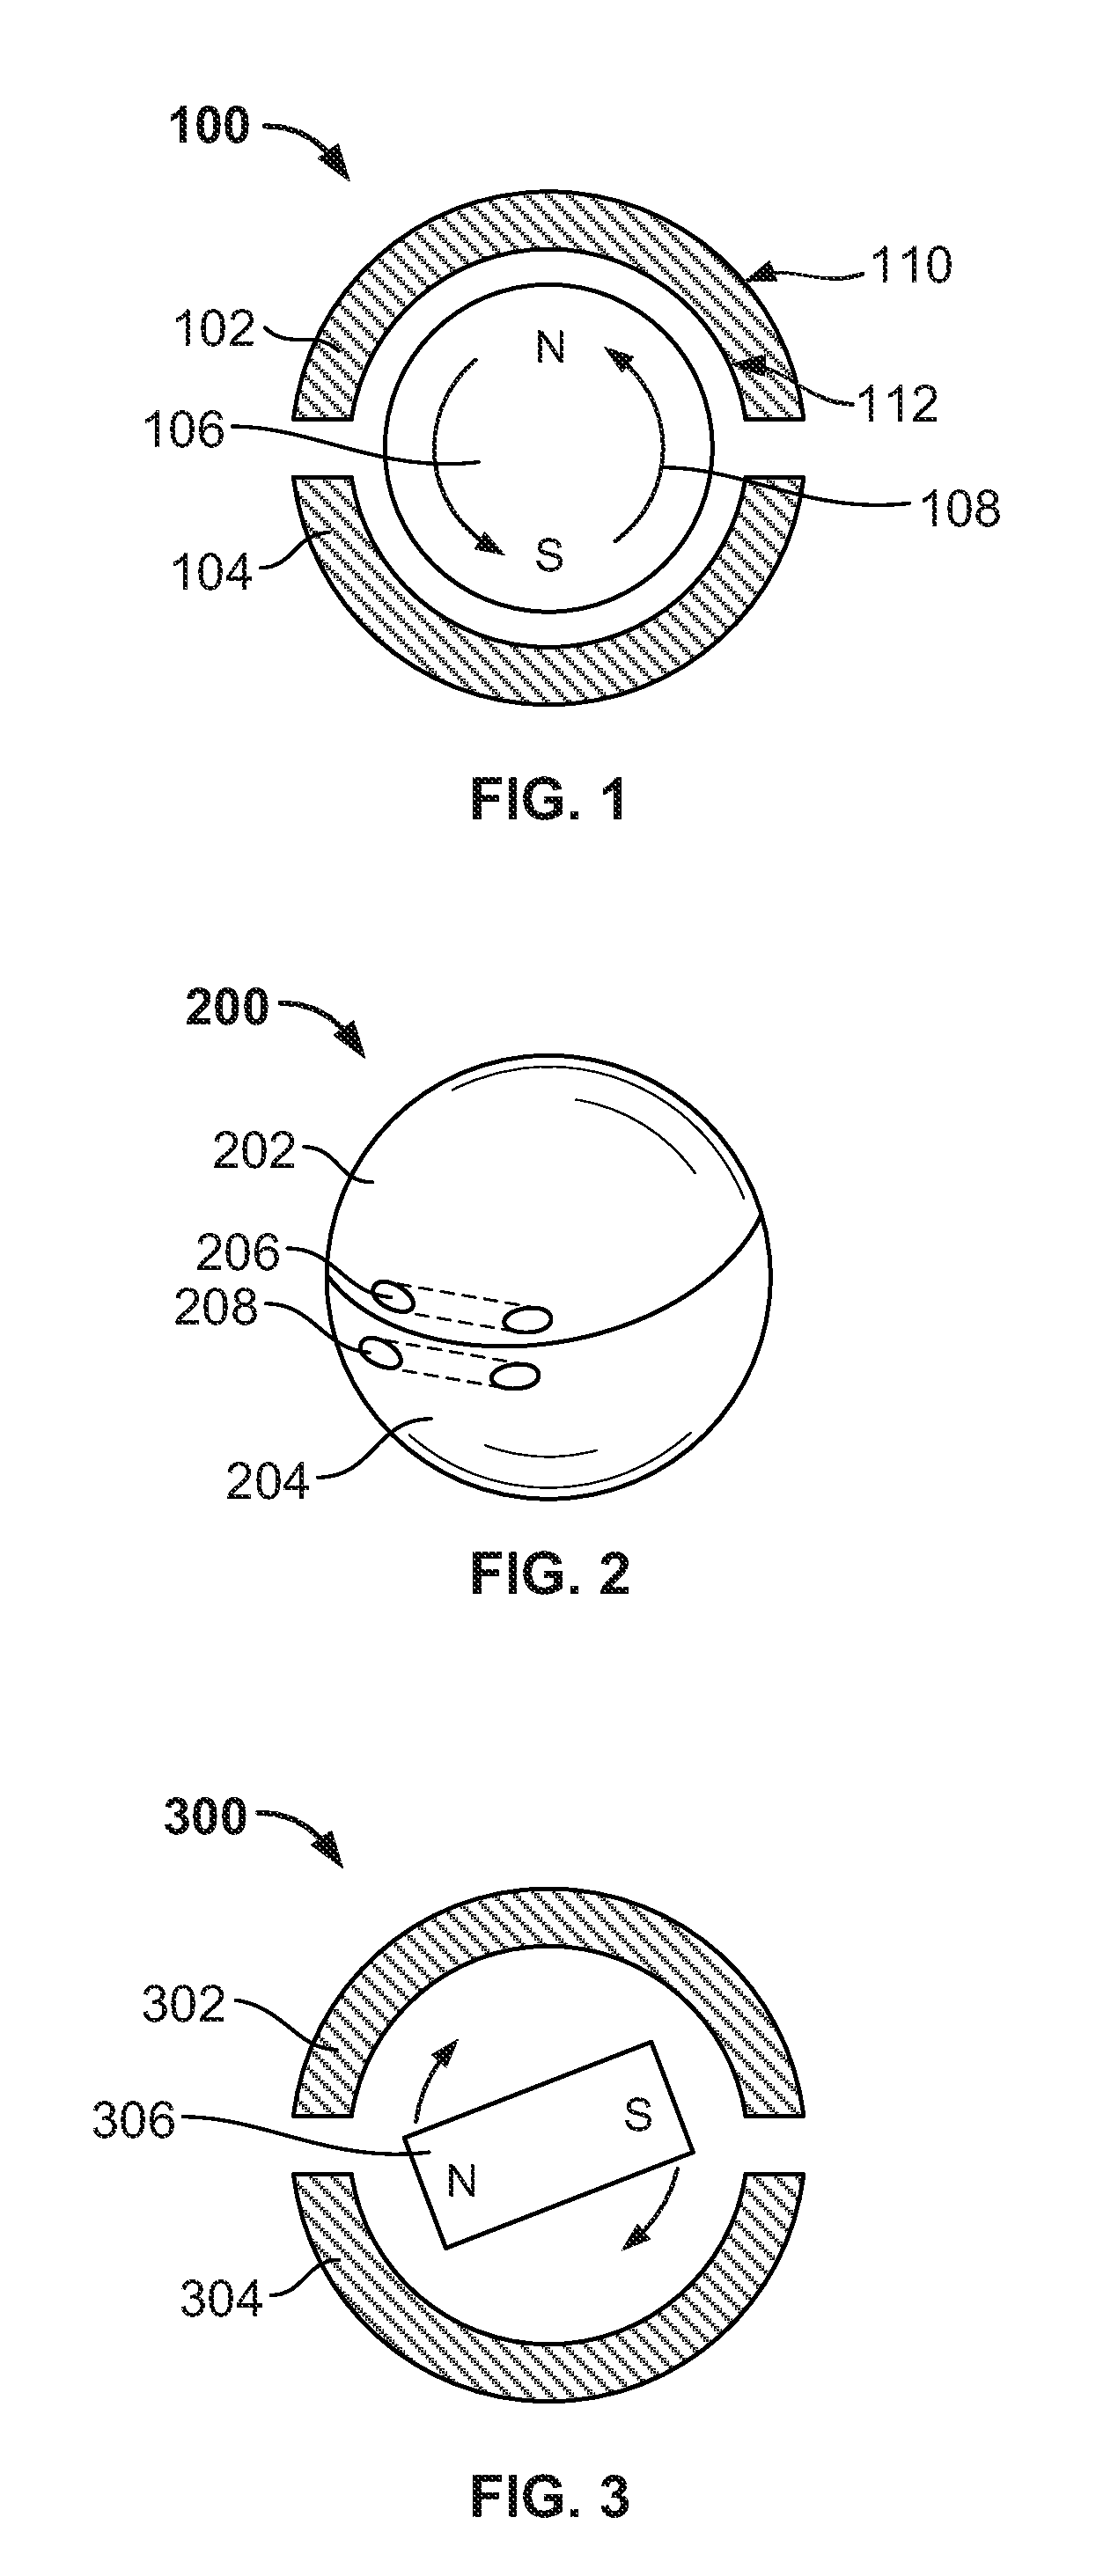 Medical implant with floating magnets